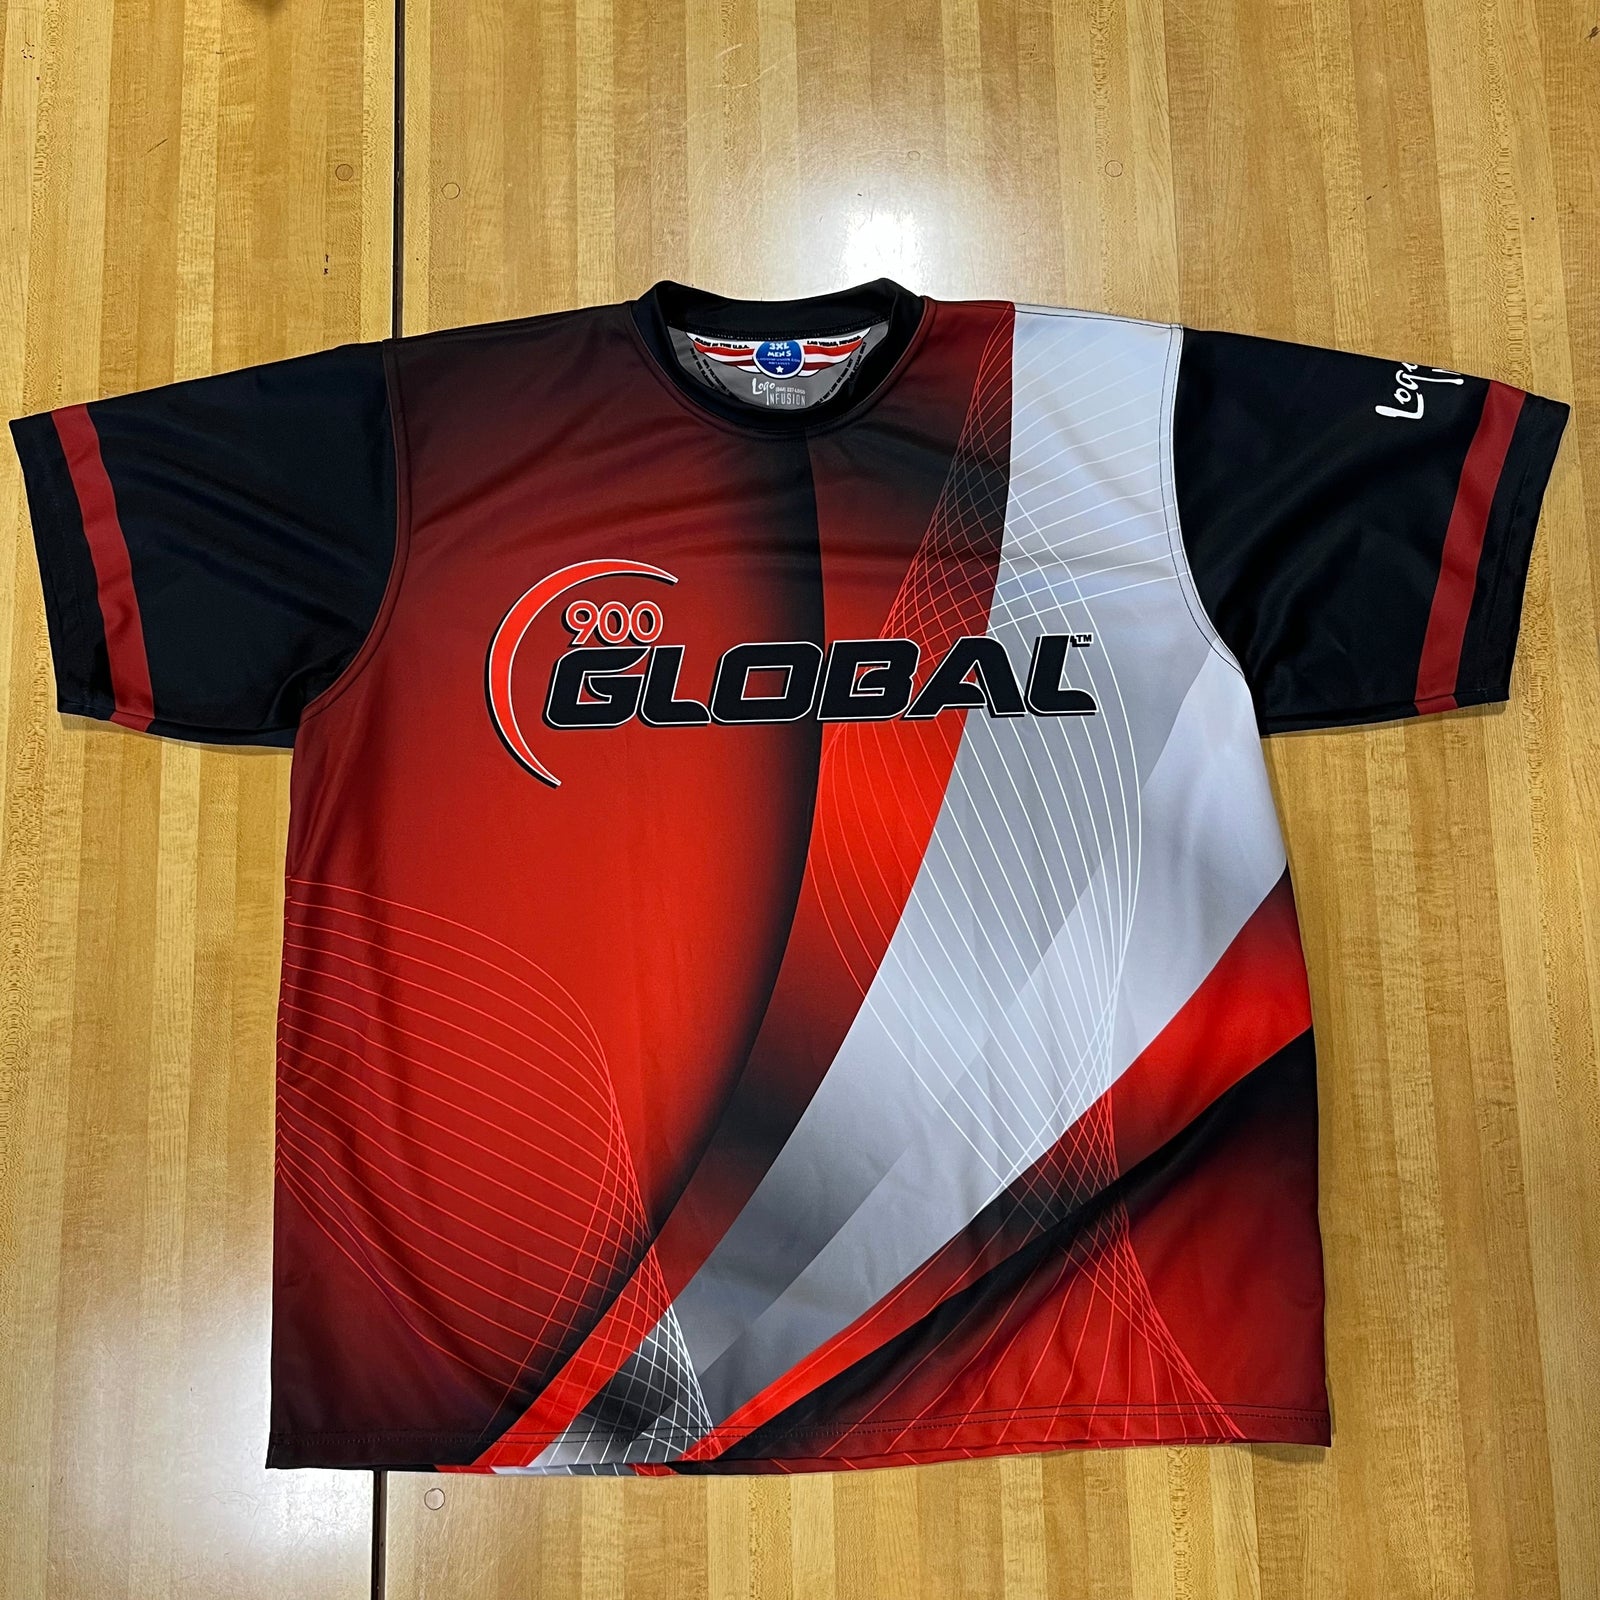 900 Global Red Curve Shirt